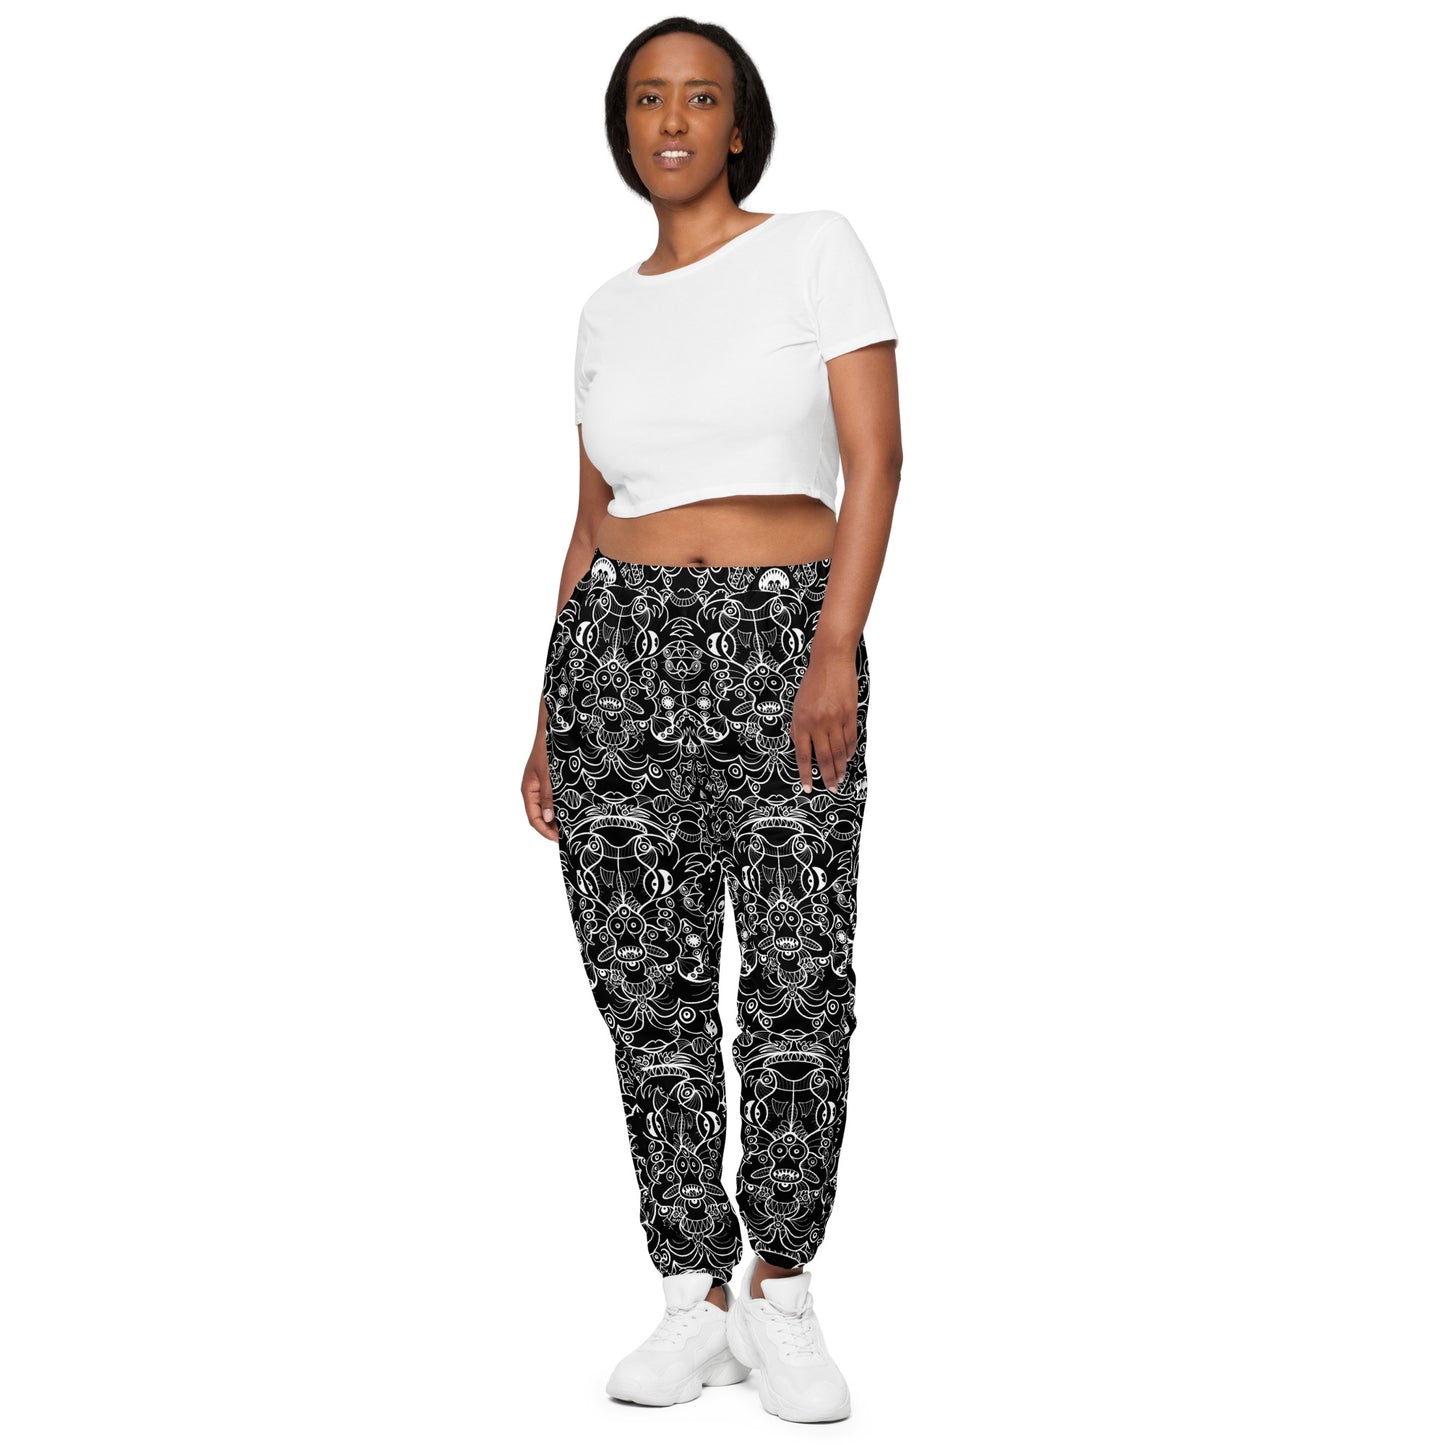 The Powerful Dark Side of the Doodle World - Unisex track pants. Front view